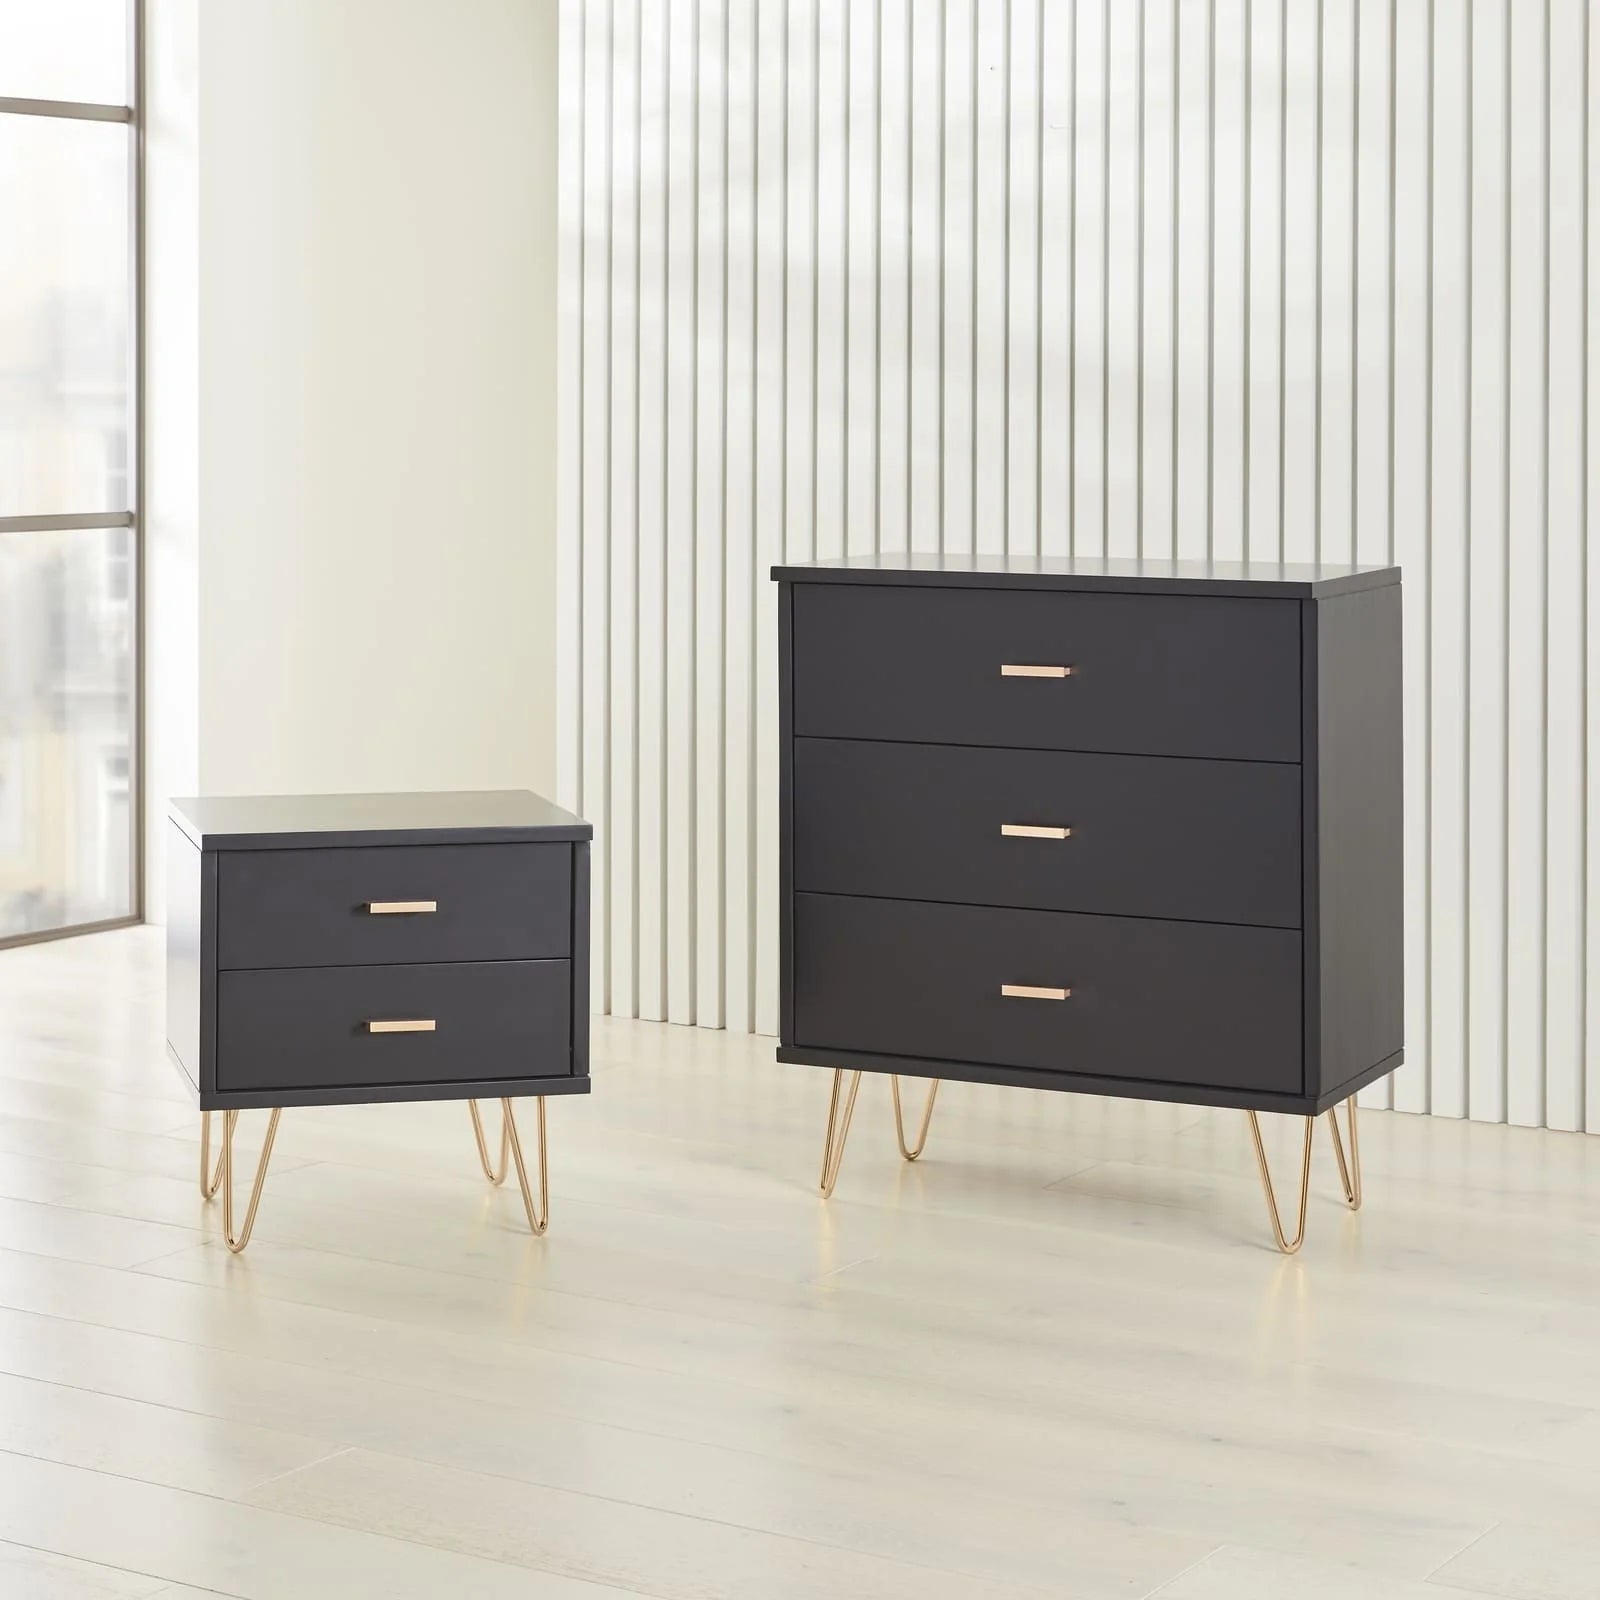 Monroe black painted solid wood chest of drawers with metal hardware | malletandplane.com